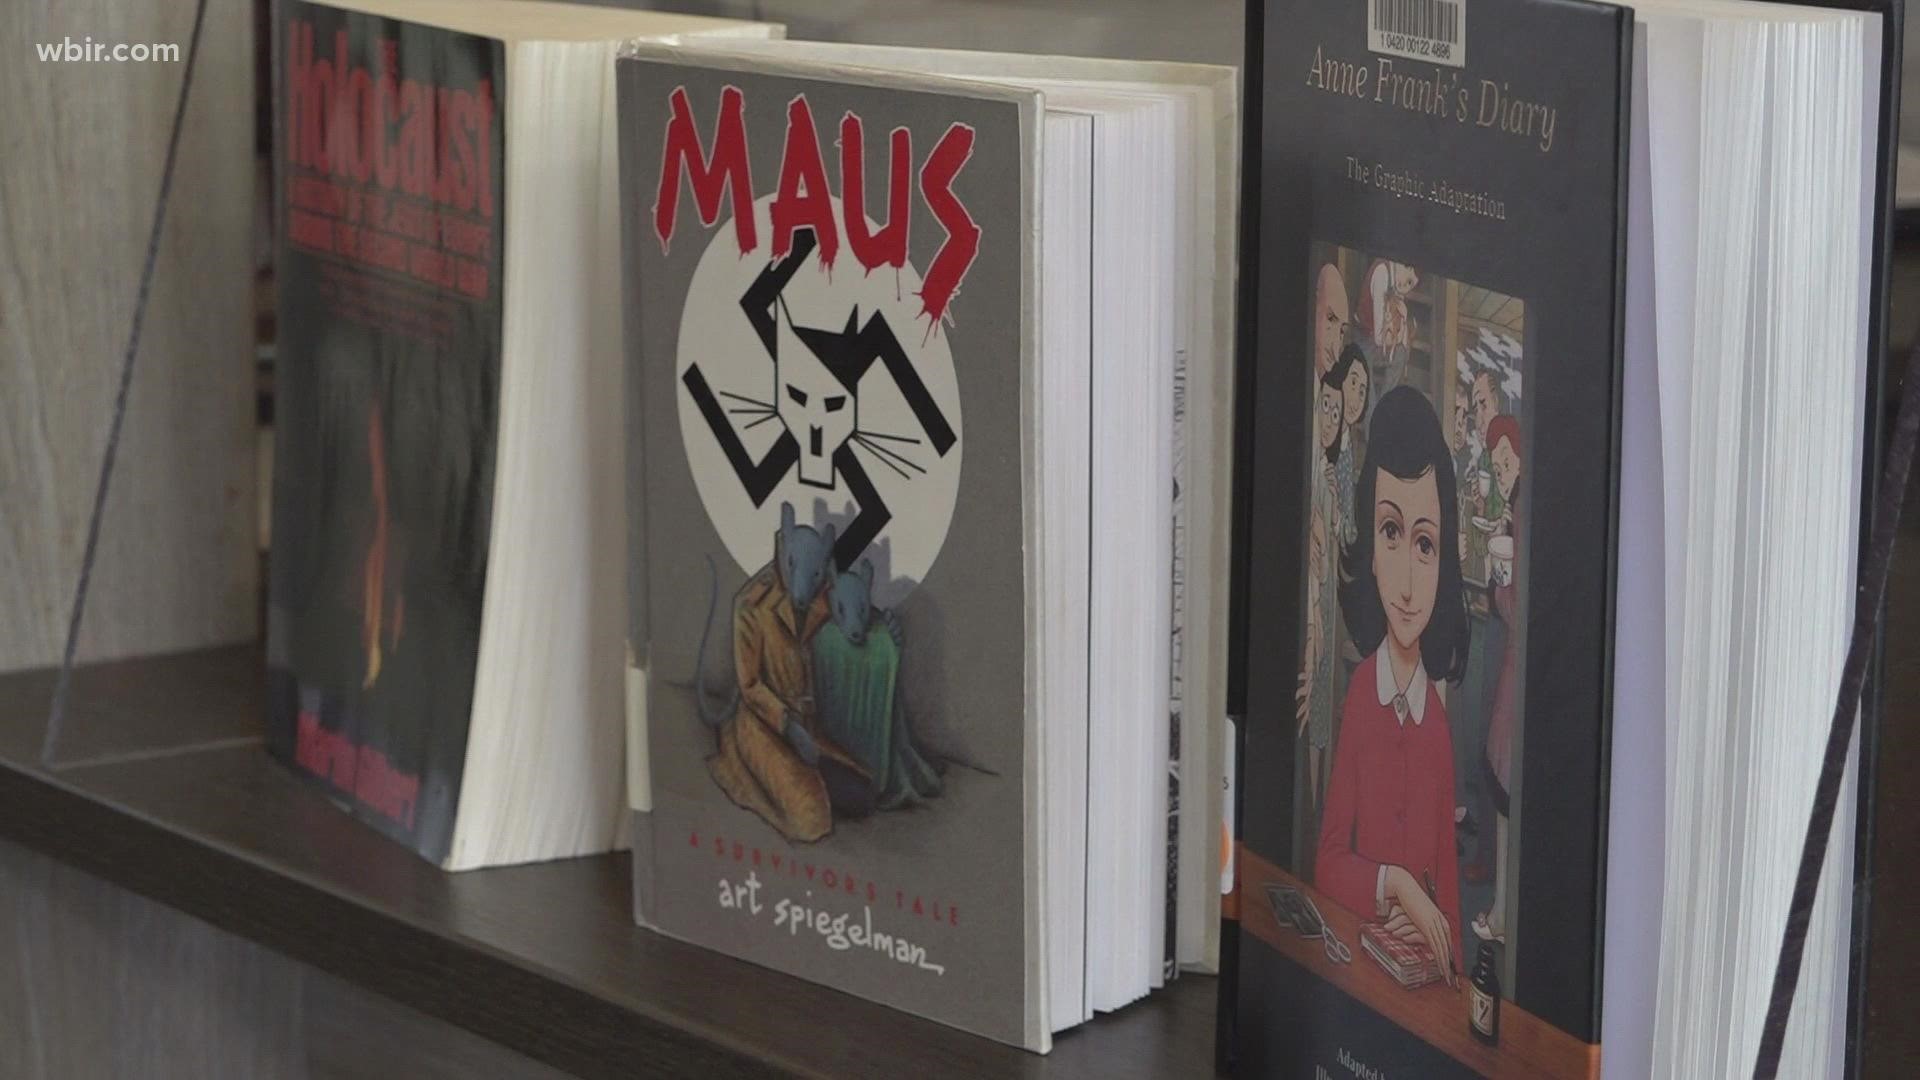 The award-winning Holocaust book was banned in McMinn County for strong language and graphic depictions of genocide.